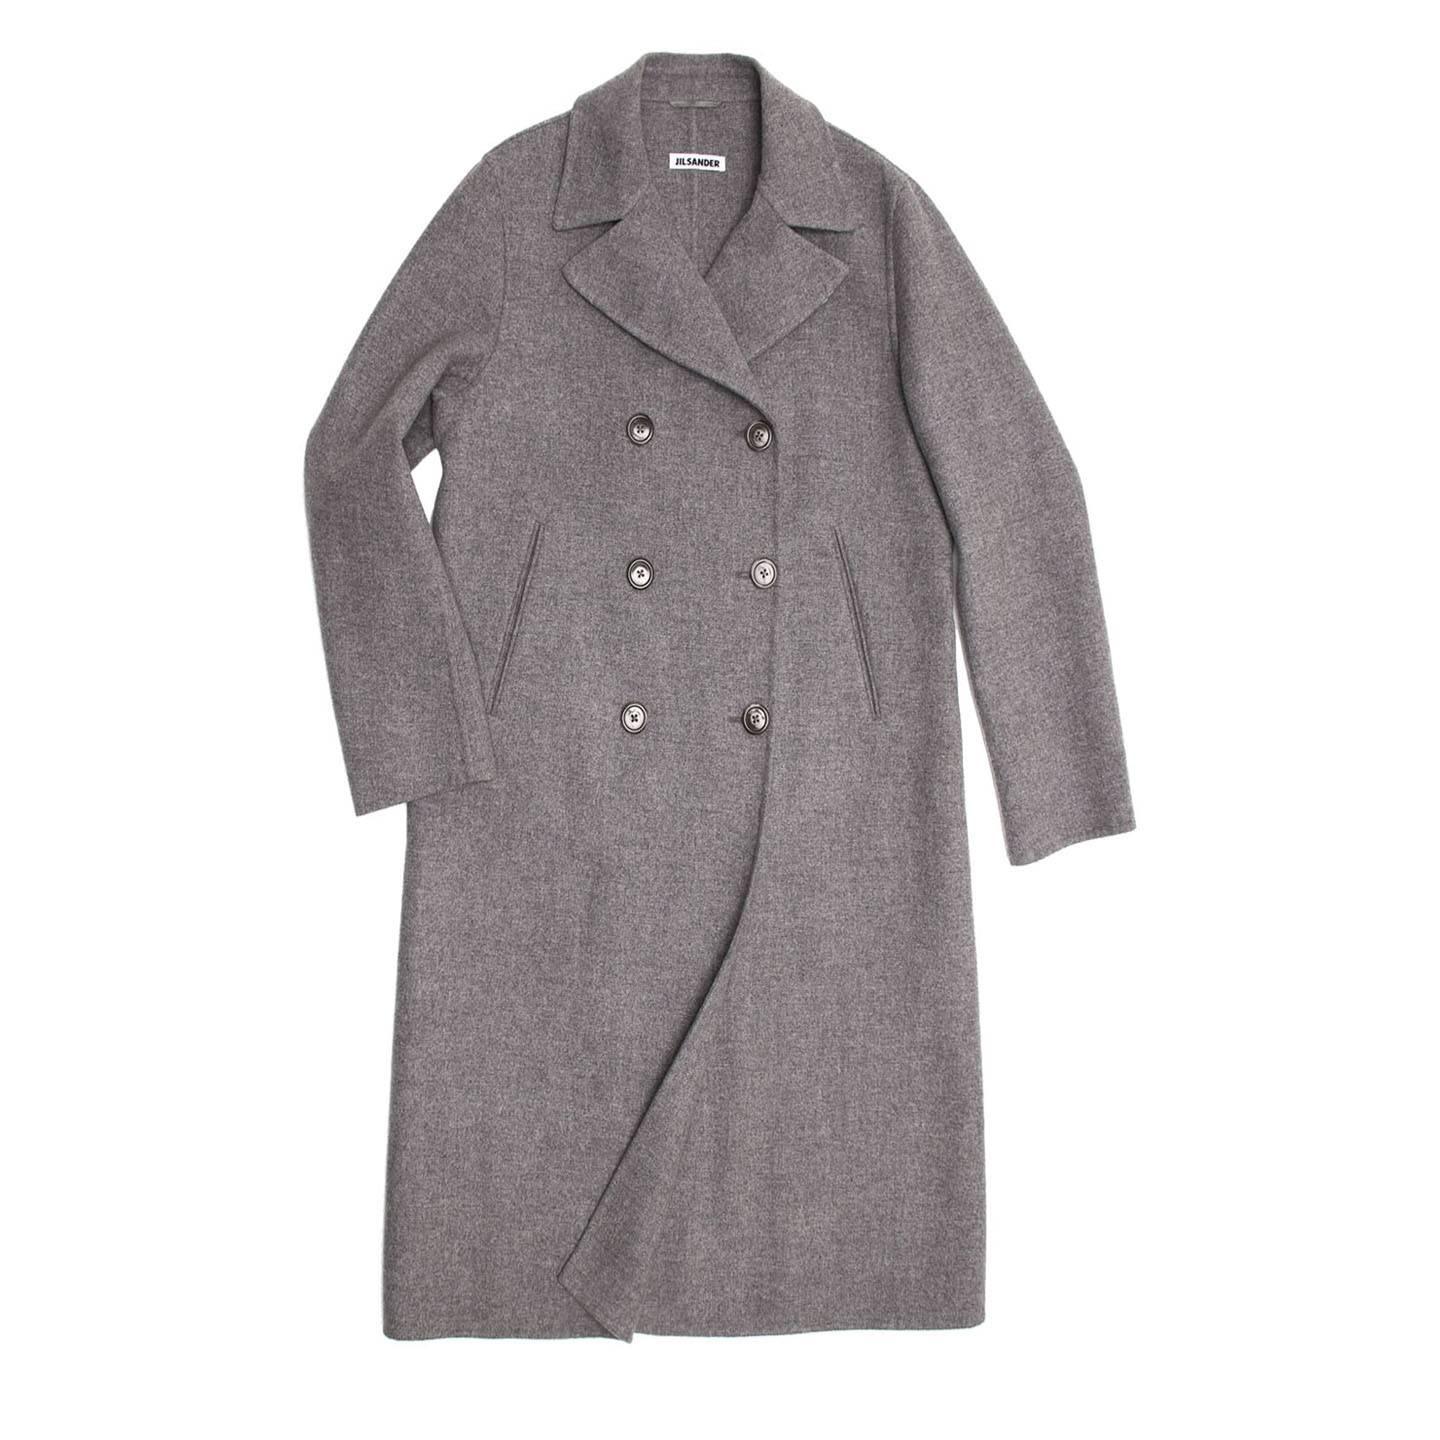 Grey cashmere double breasted coat with loose fit and mid calf length. The finishing of the fabric is double face, which gives it a very clean and elegant look.

Size  38 French sizing

Condition  Excellent: never worn